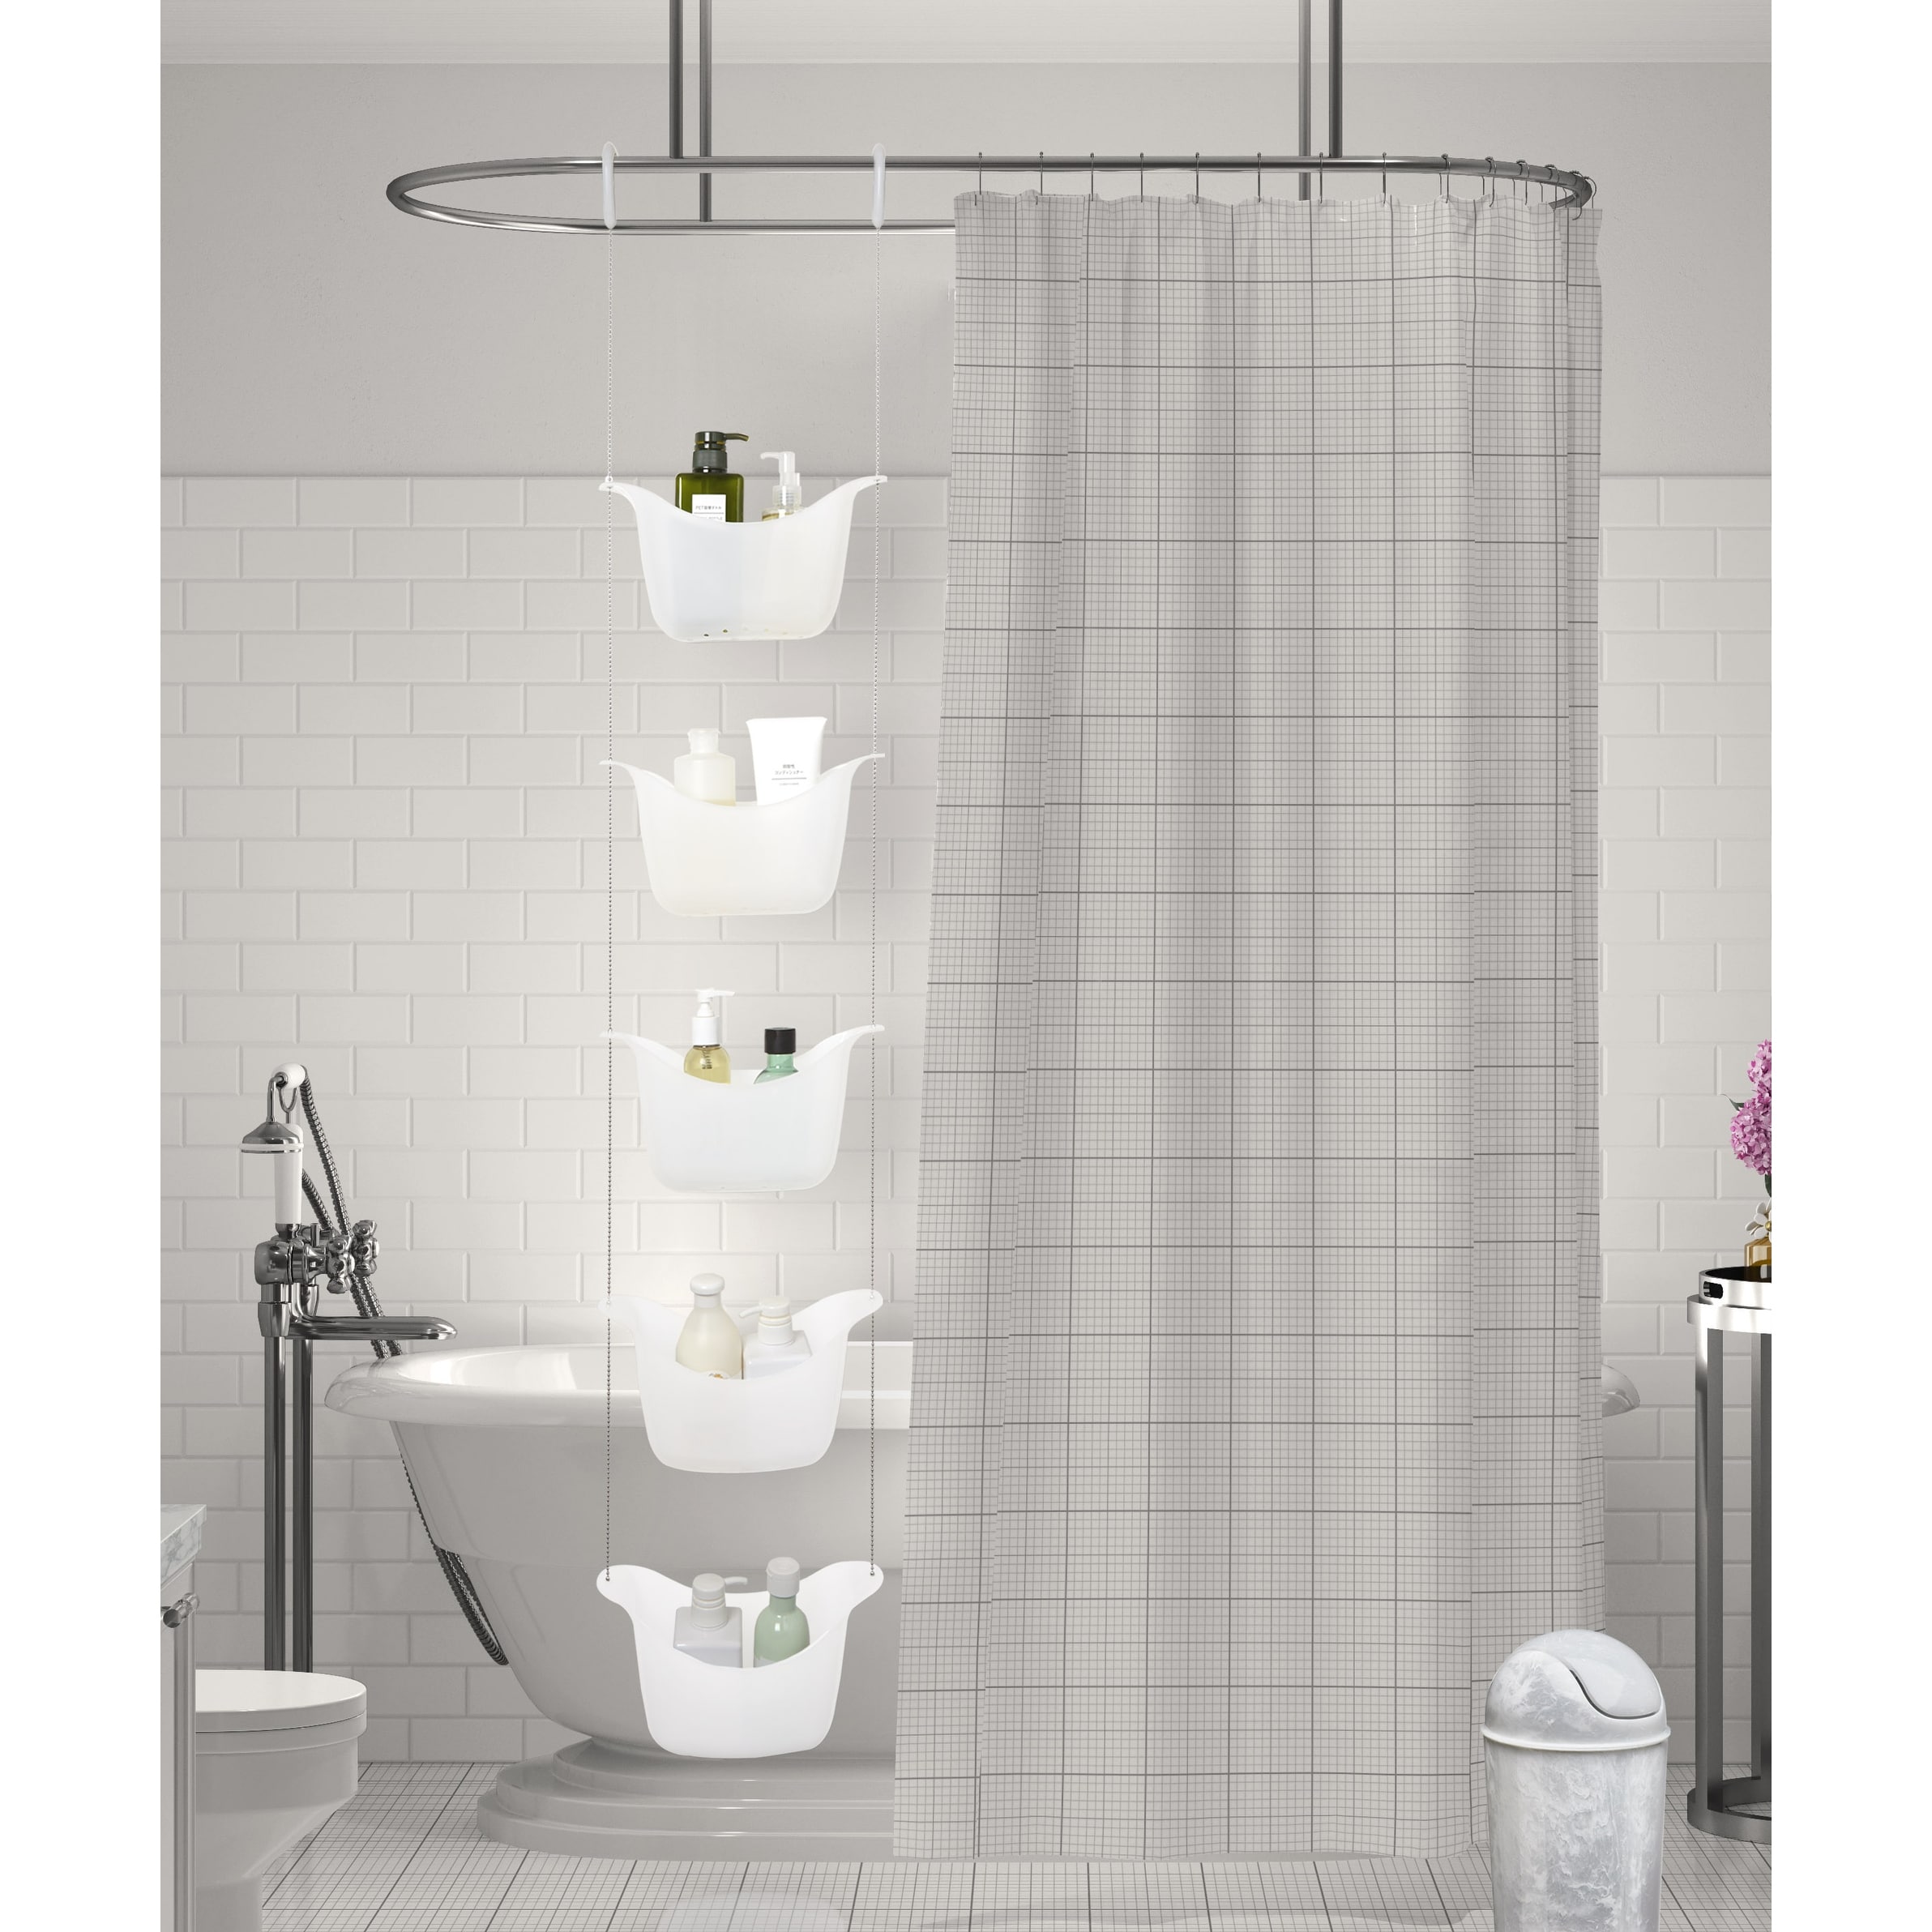 Umbra Oasis Hanging Shower Caddy - 3 basket - Frosted White - NEW